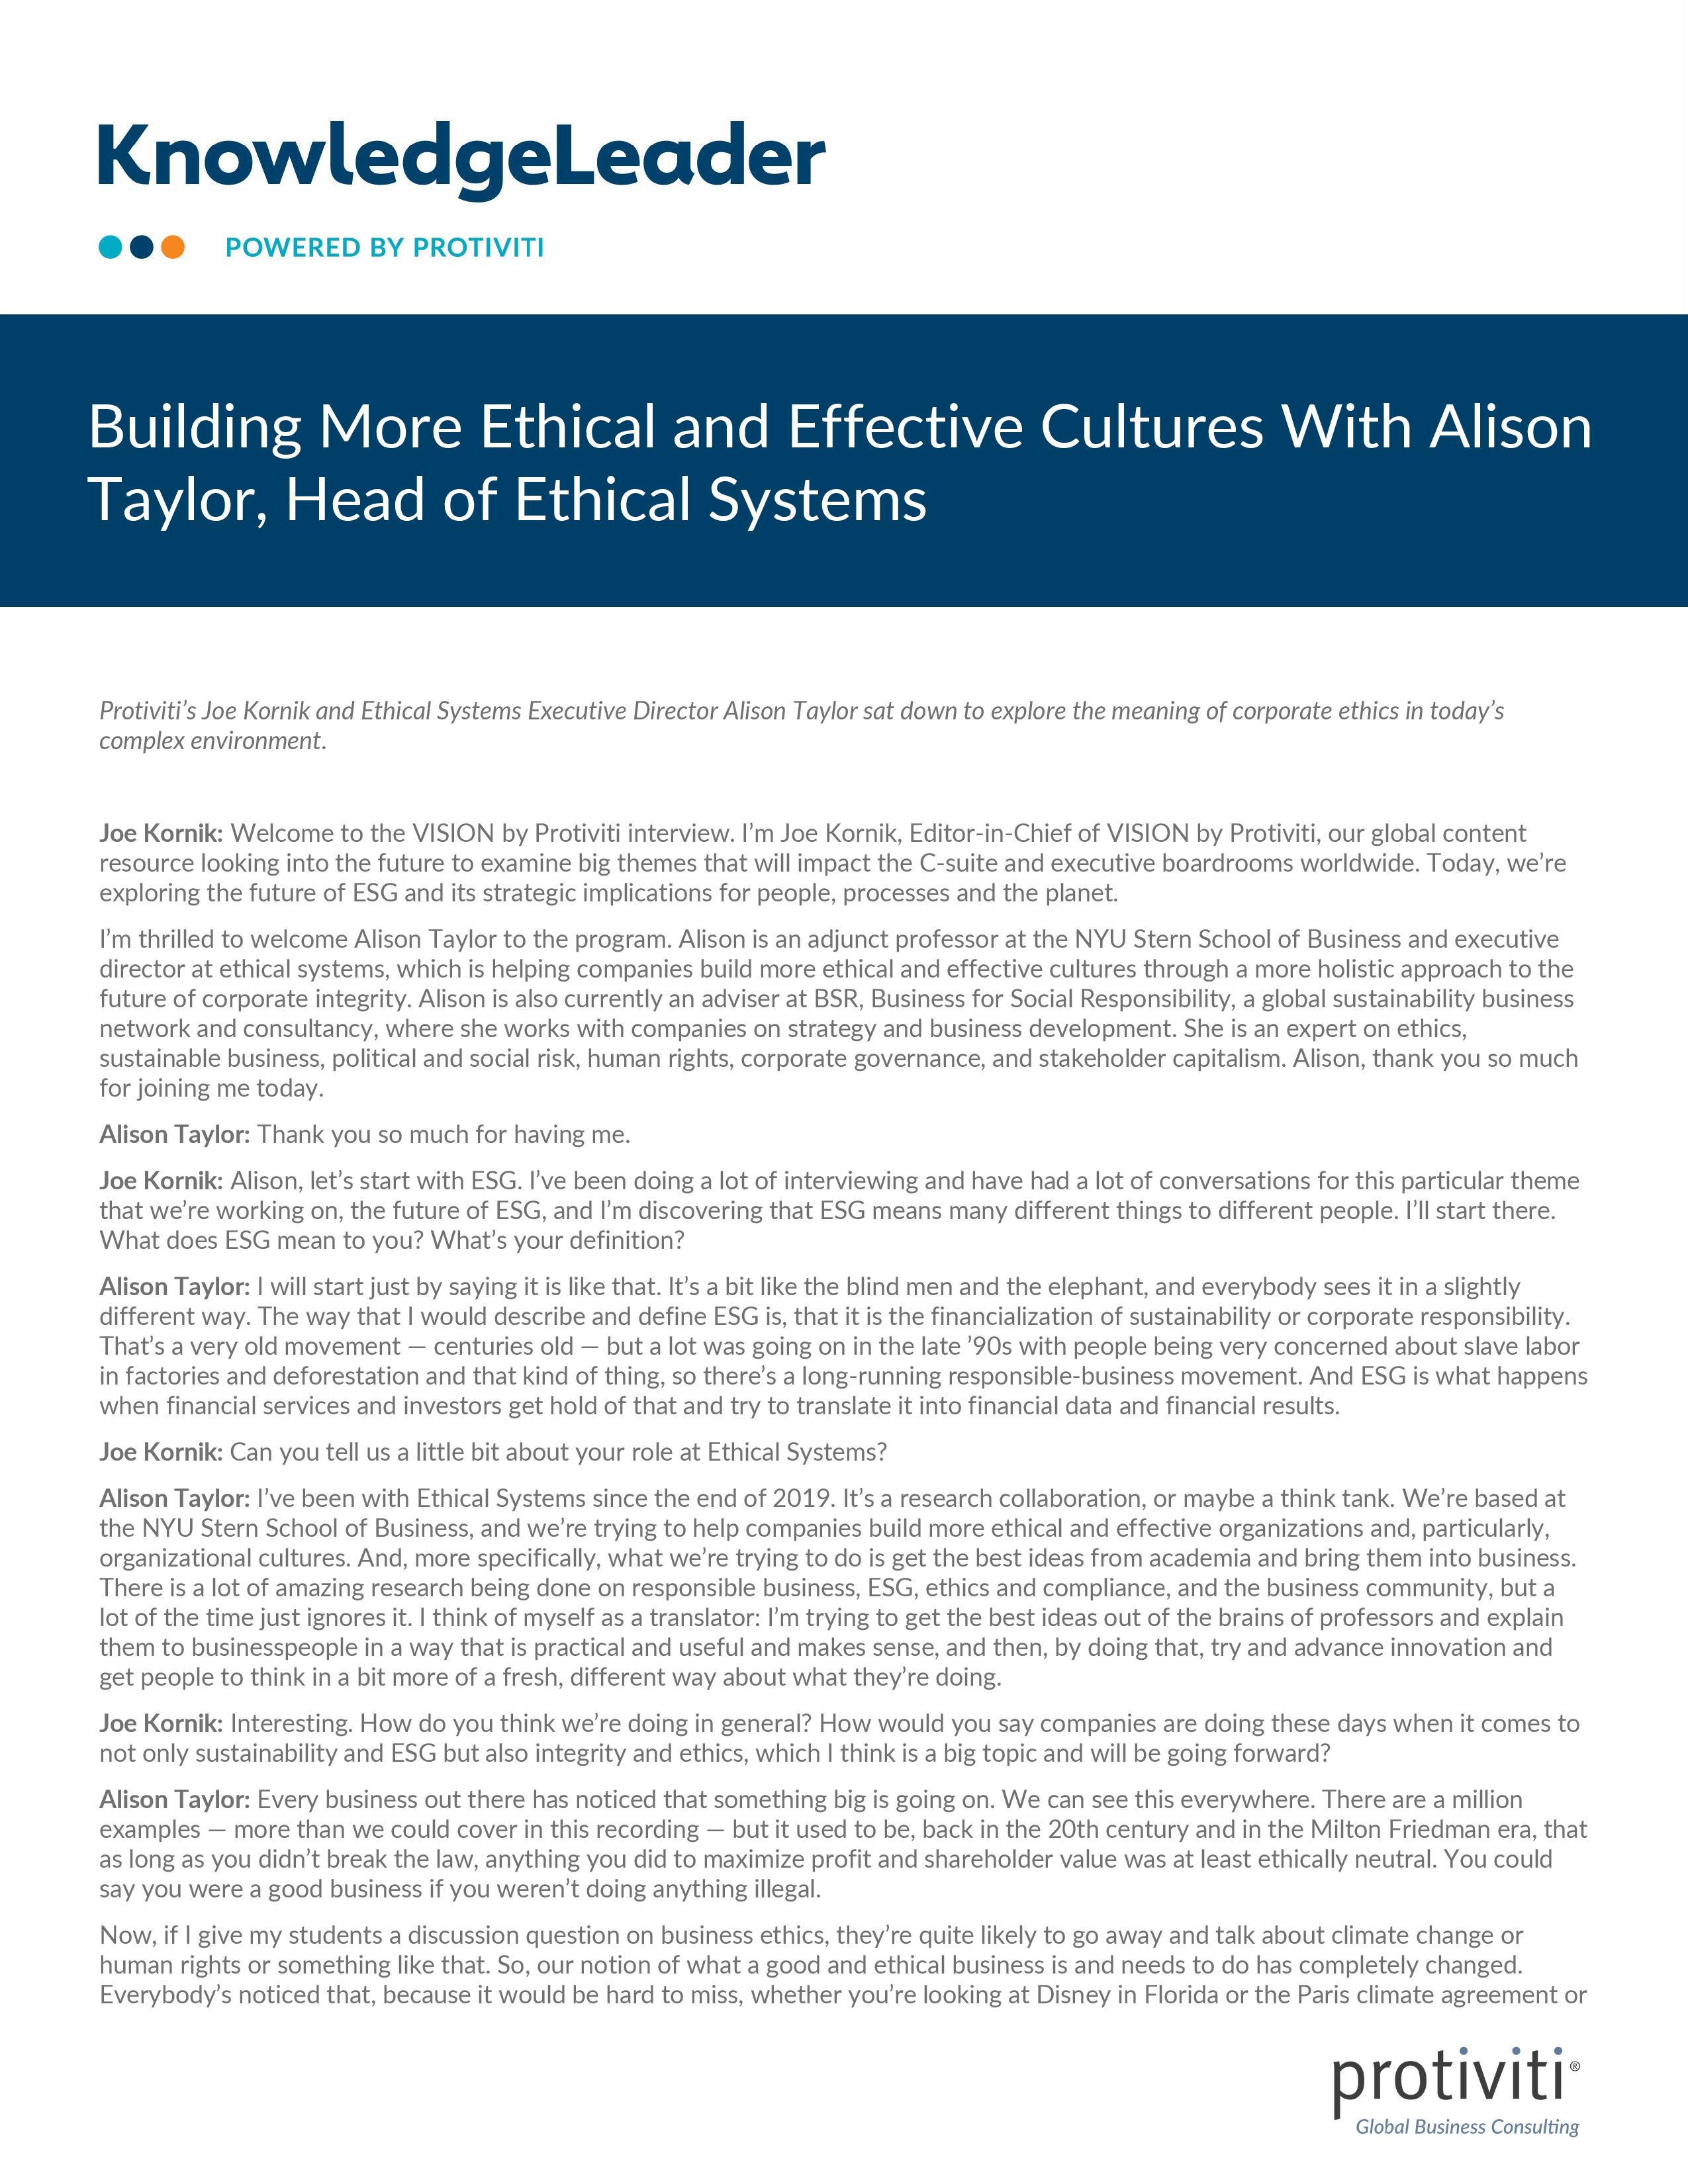 Screenshot of the First Page of Building More Ethical and Effective Cultures With Alison Taylor, Head of Ethical Systems